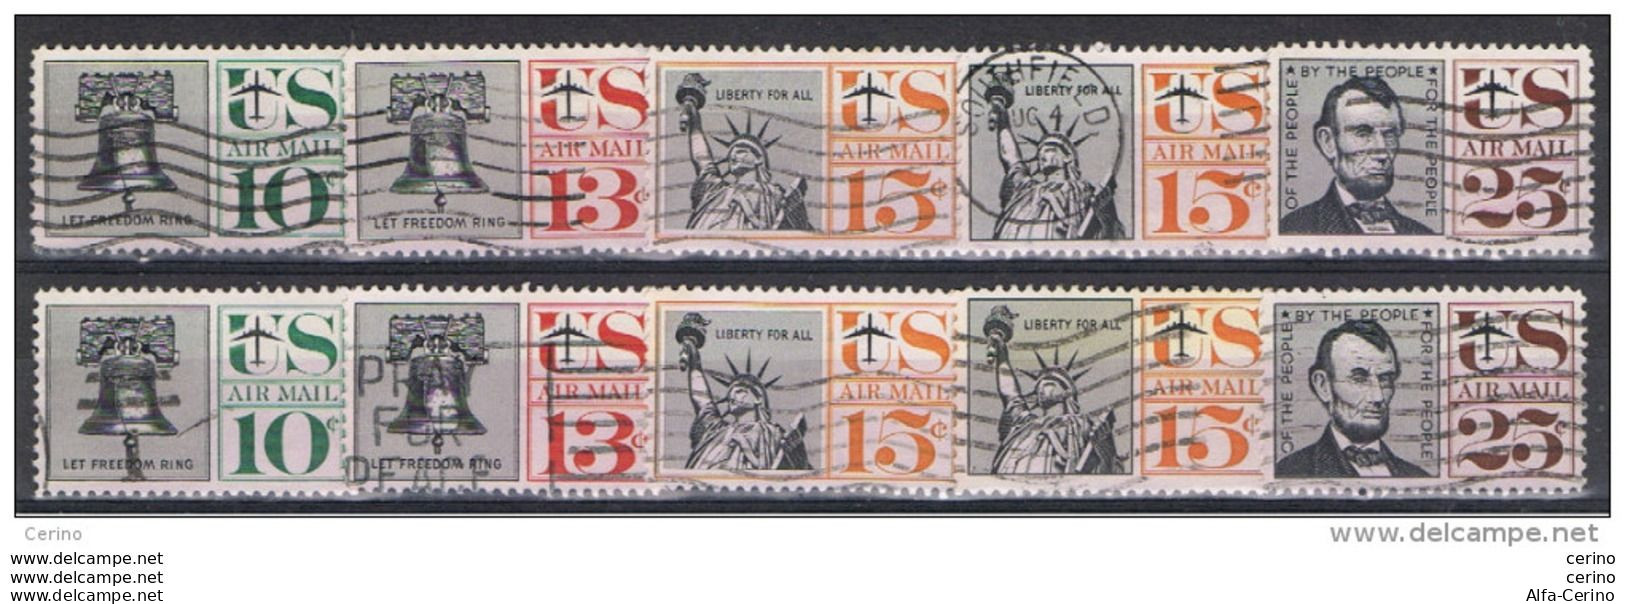 U.S.A.:  1959/61  AIR  MAIL  -  KOMPLET  SET  5  USED  STAMPS  -  REP.  2  EXEMPLARY  -  YV/TELL. 56/60 - 2a. 1941-1960 Used